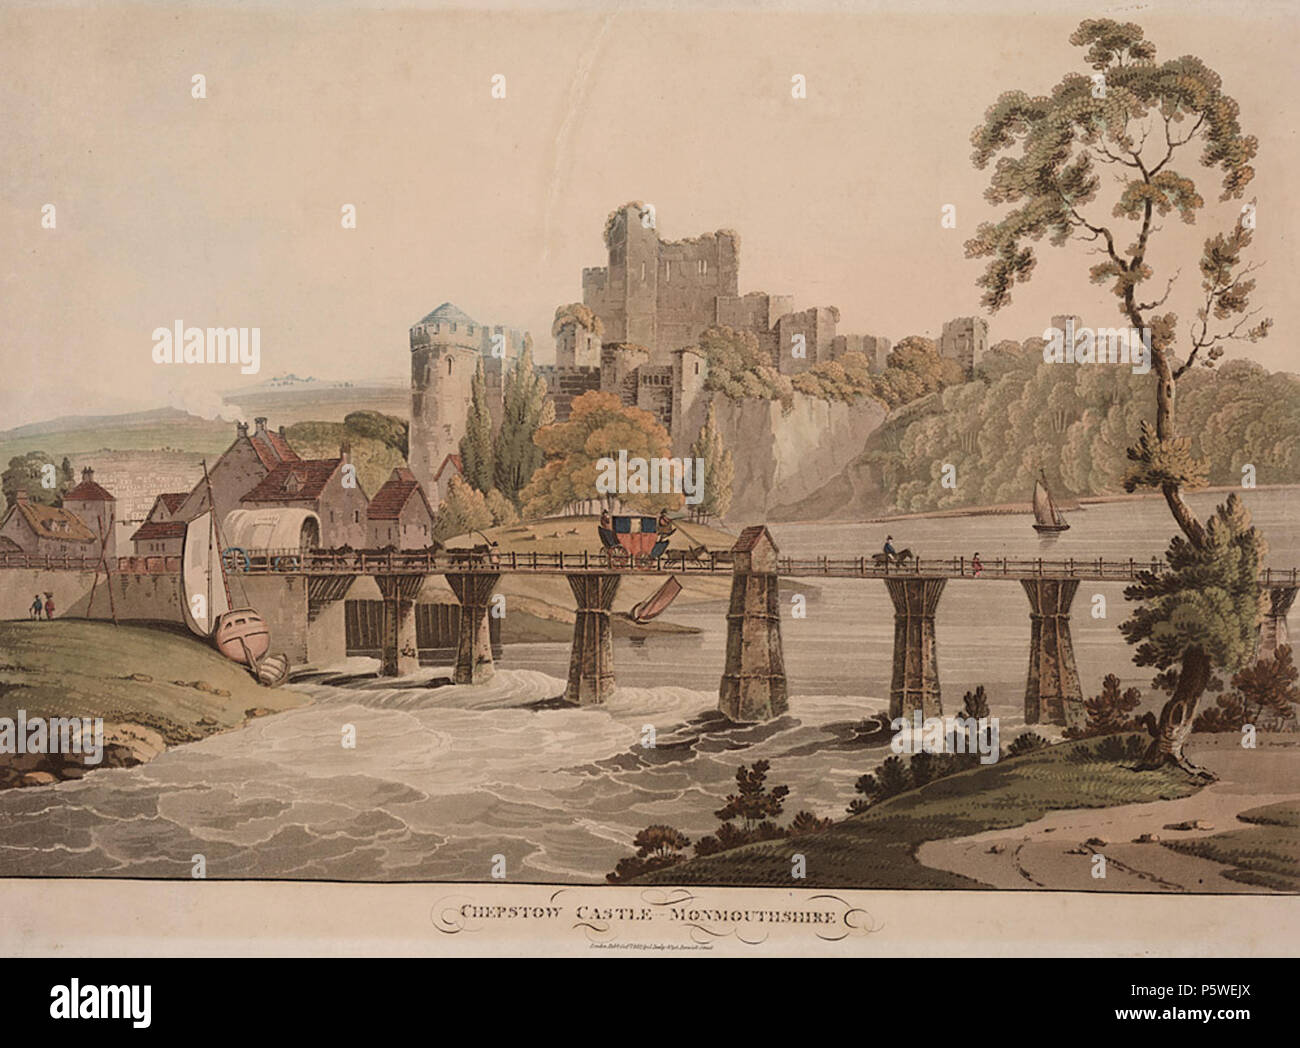 Chepstow Castle, Monmouthshire. [graphic].. 1 print : aquatint, col ; image size 333 x 491 mm., paper size 375 x 512 mm. 1812. N/A 337 Chepstow Castle, Monmouthshire. (3375668) Stock Photo